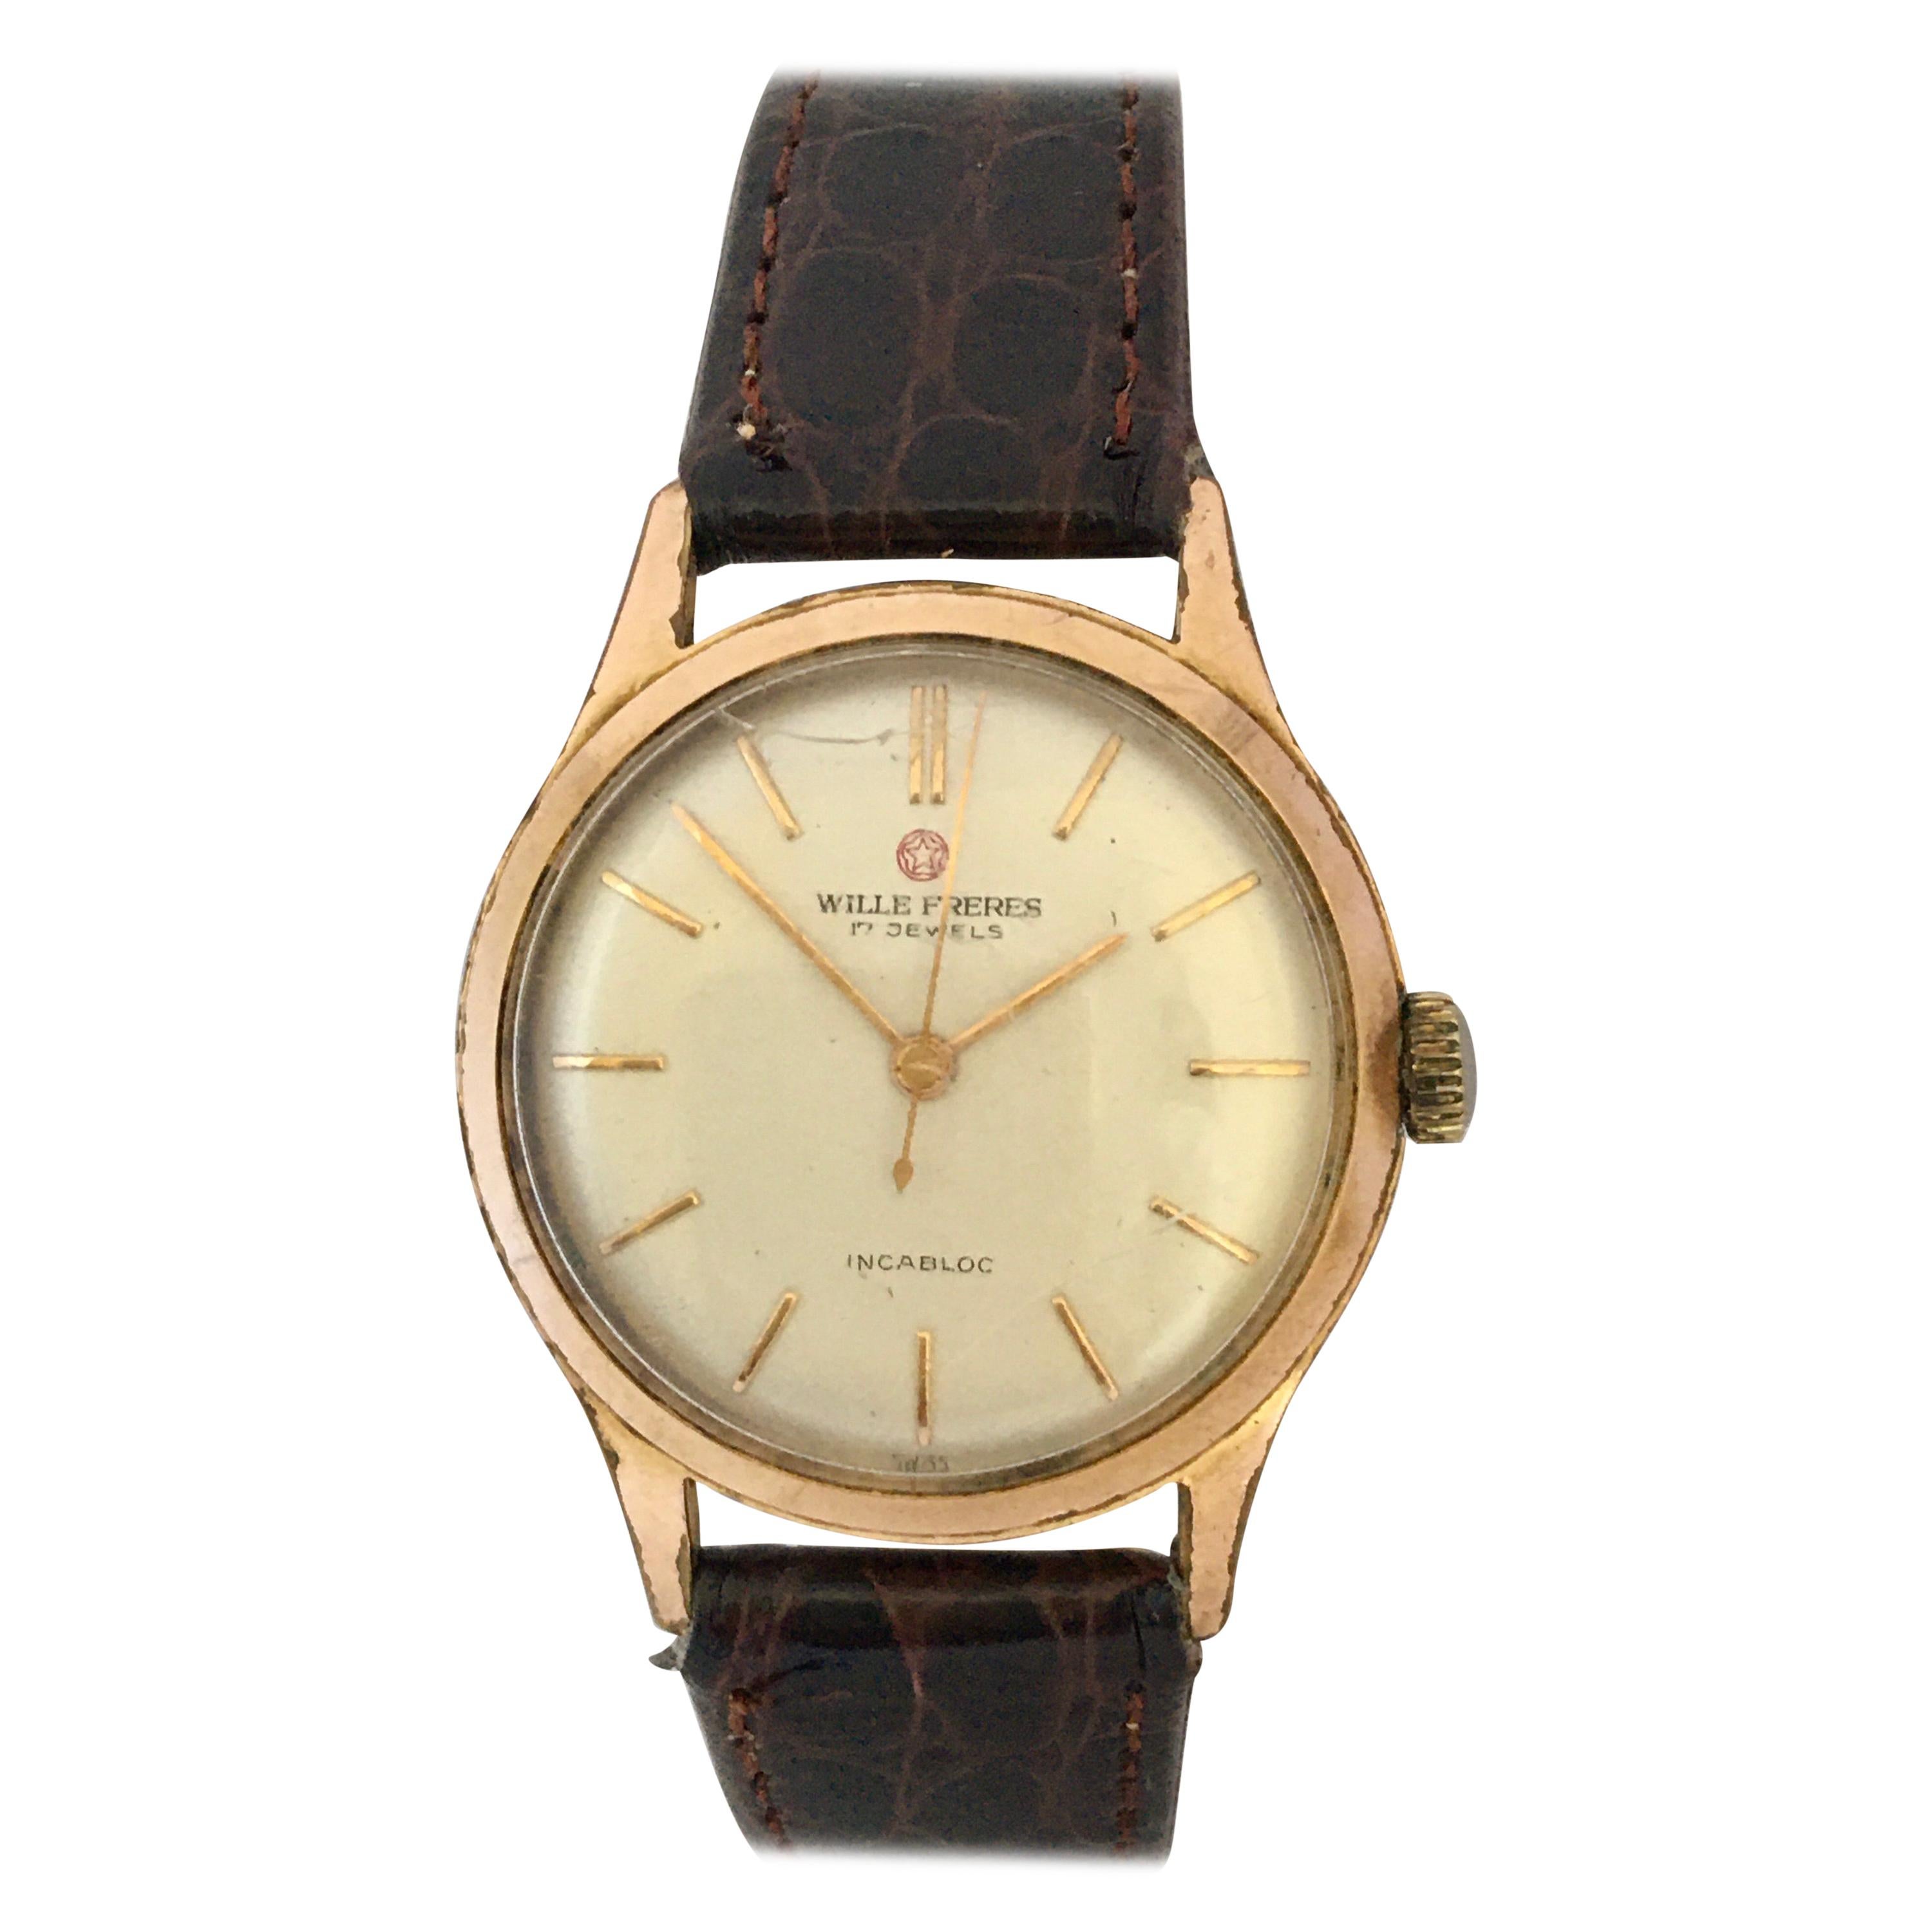 Vintage 1960s Gold-Plated Wille Freres Mechanical Watch For Sale